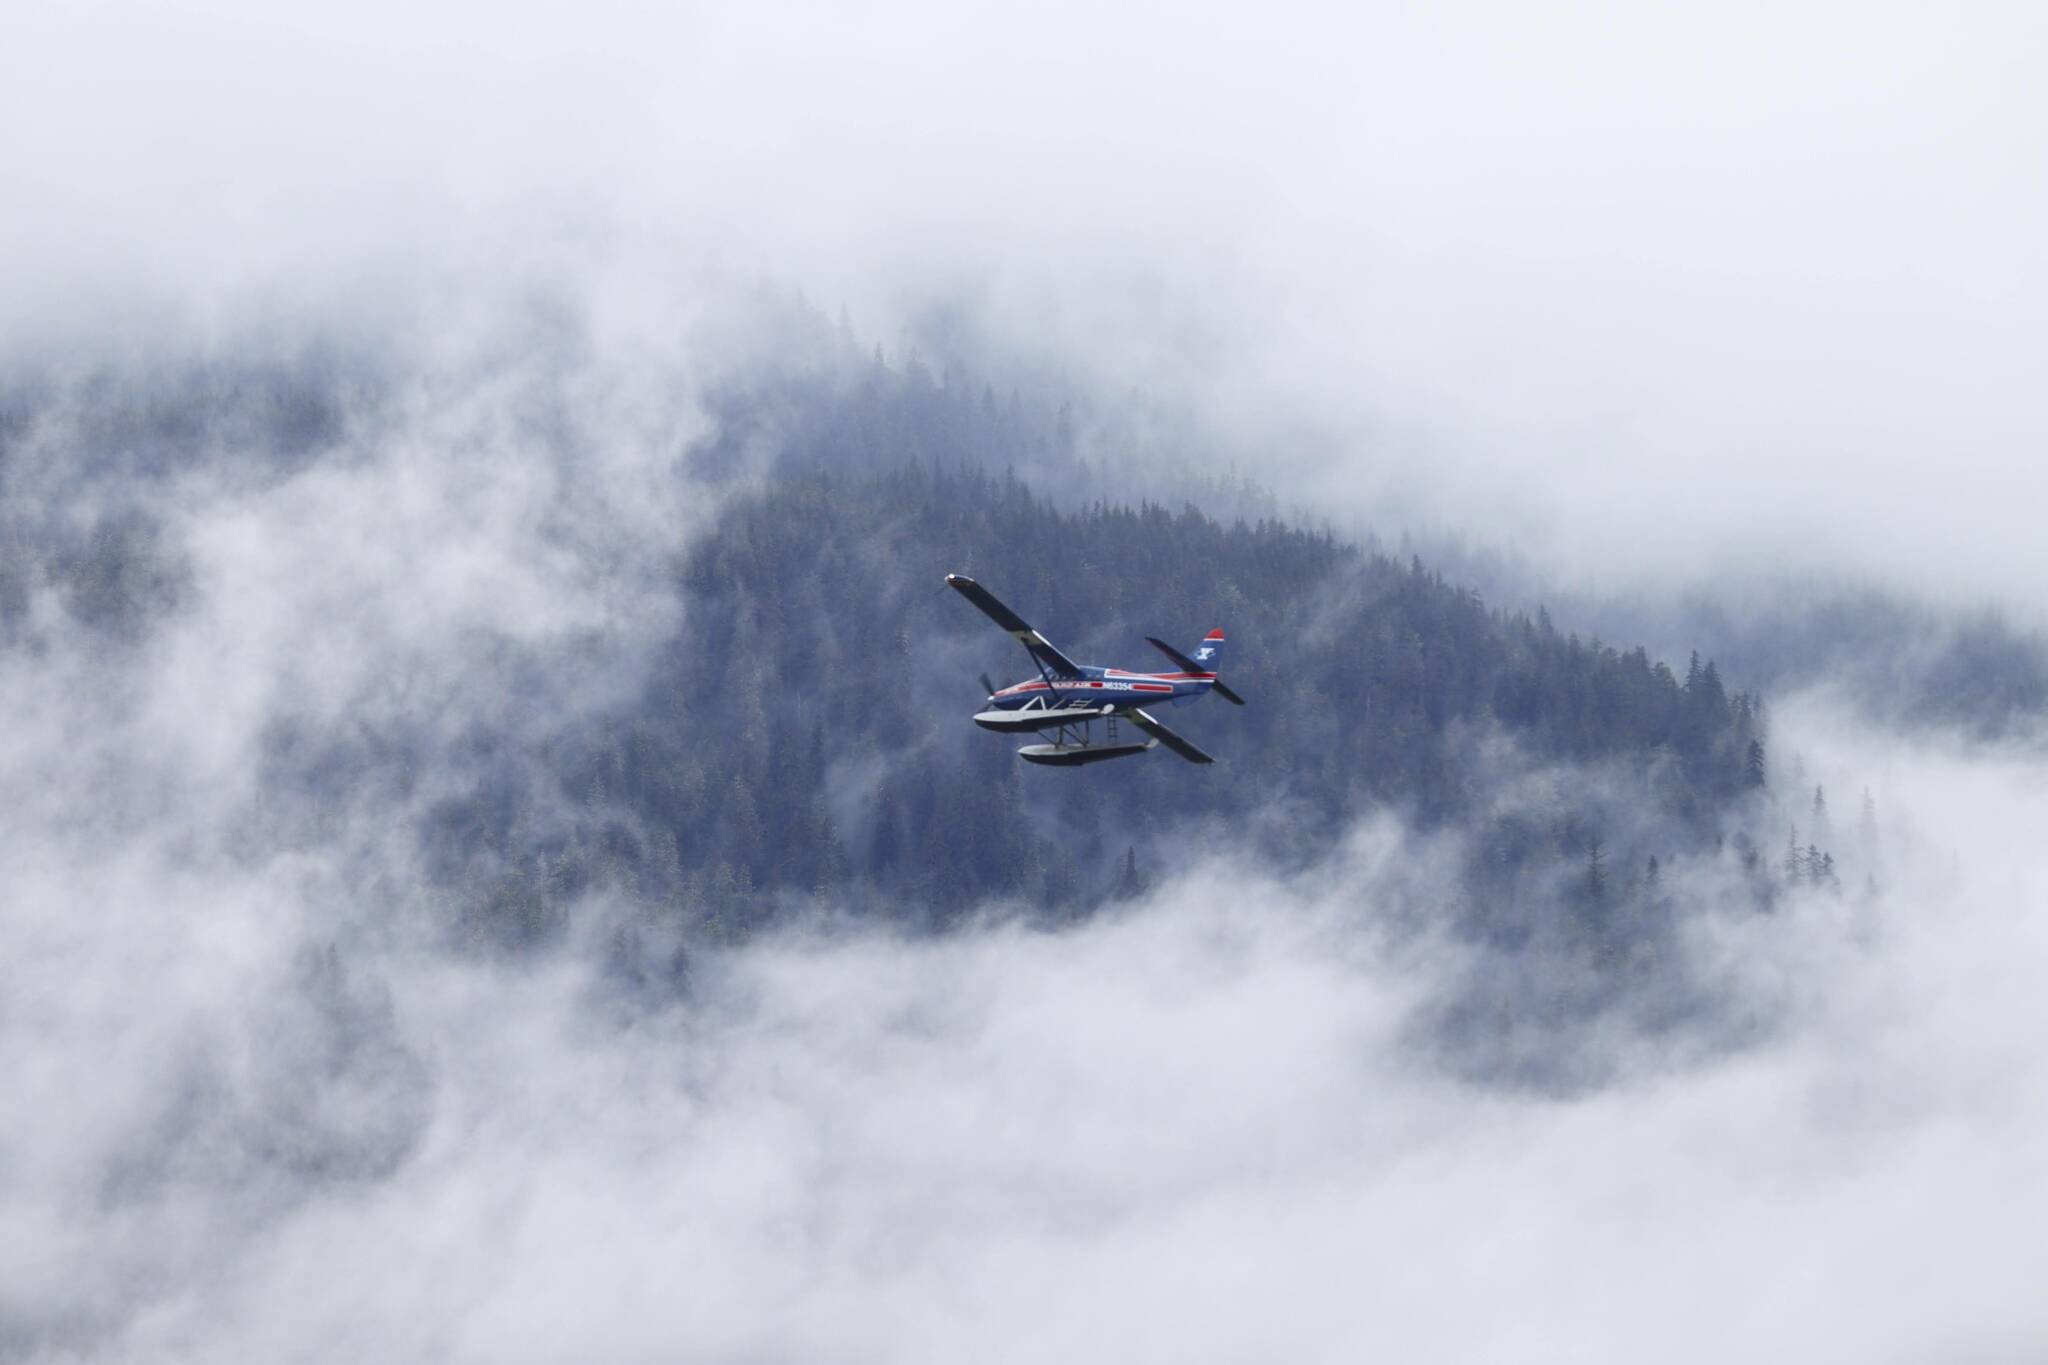 A Ward Air seaplane takes off on July 23, 2022. Low cloud ceilings and limited visibility have scrubbed a number of flights from small airplane operators who are in the Southeast recently. (Michael S. Lockett / Juneau Empire)